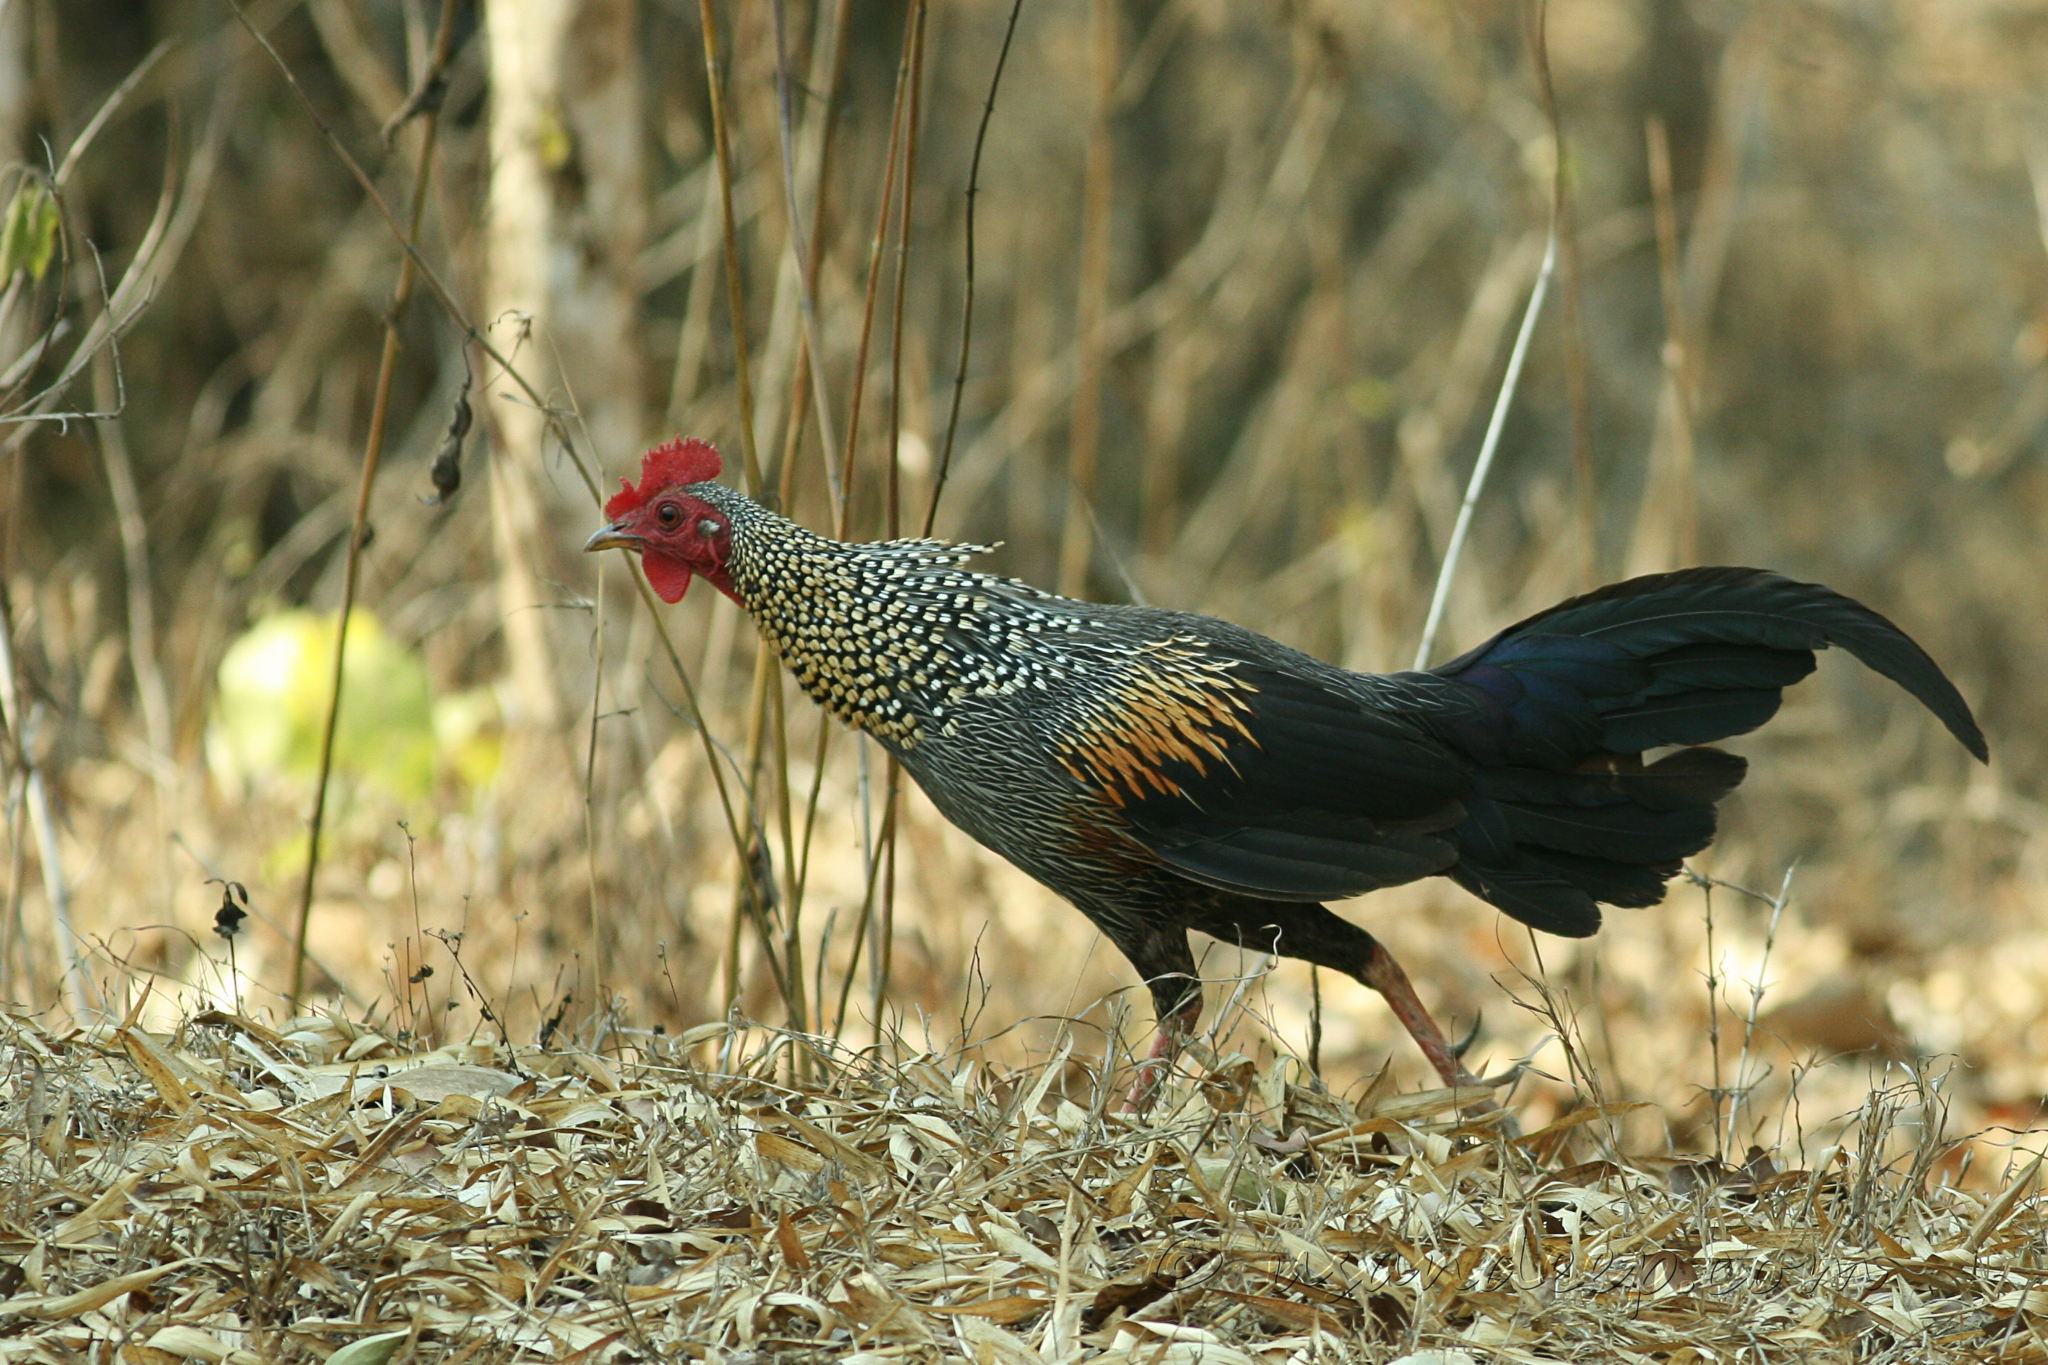 Sandeep 's World >> Wild Rooster at Bandipur